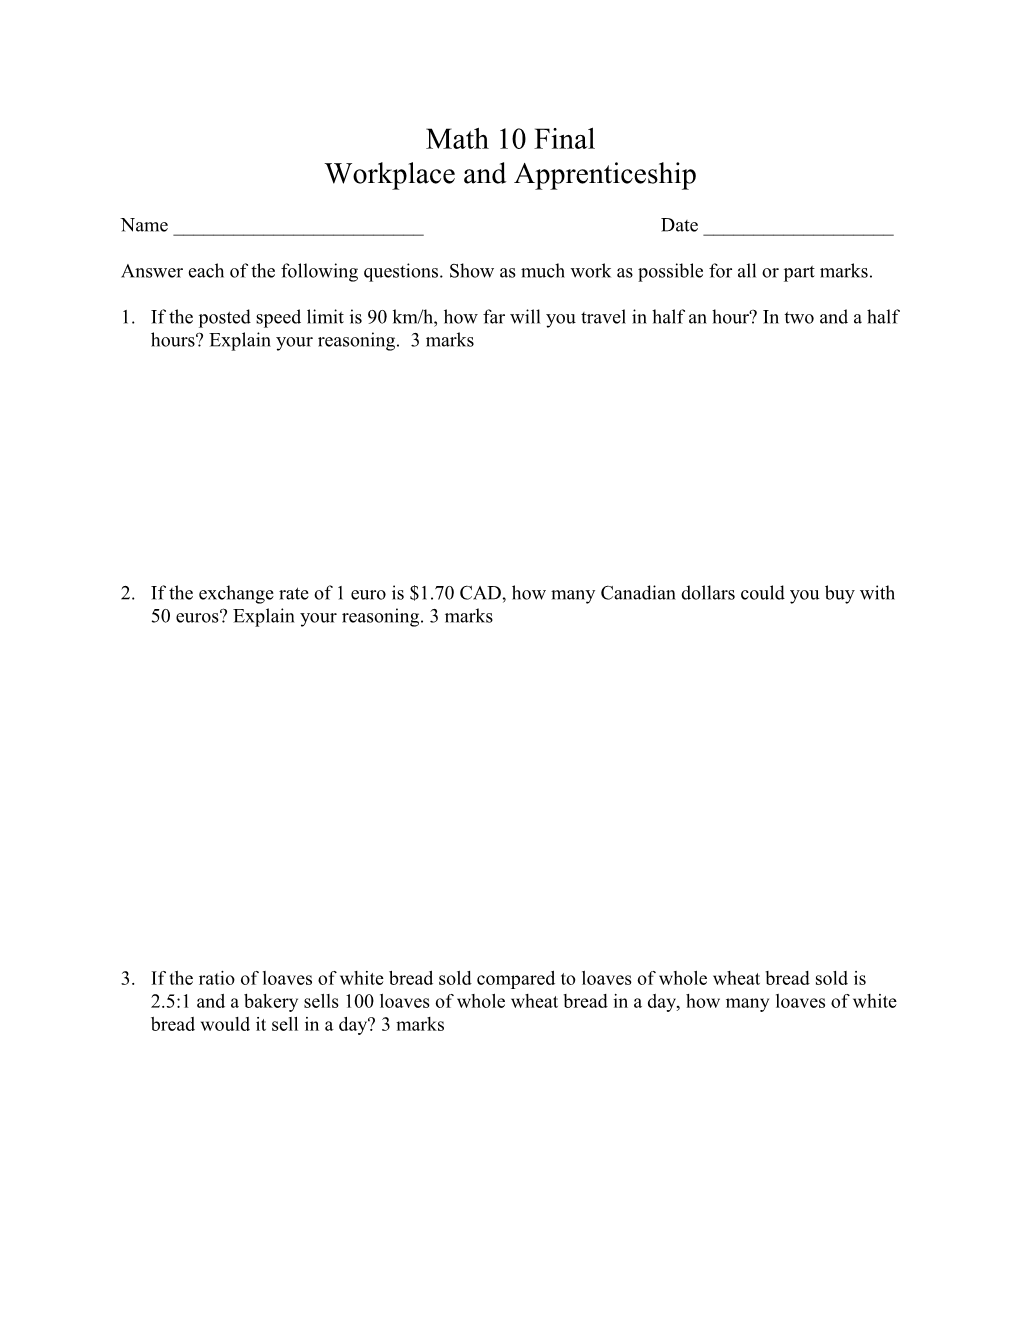 Workplace and Apprenticeship